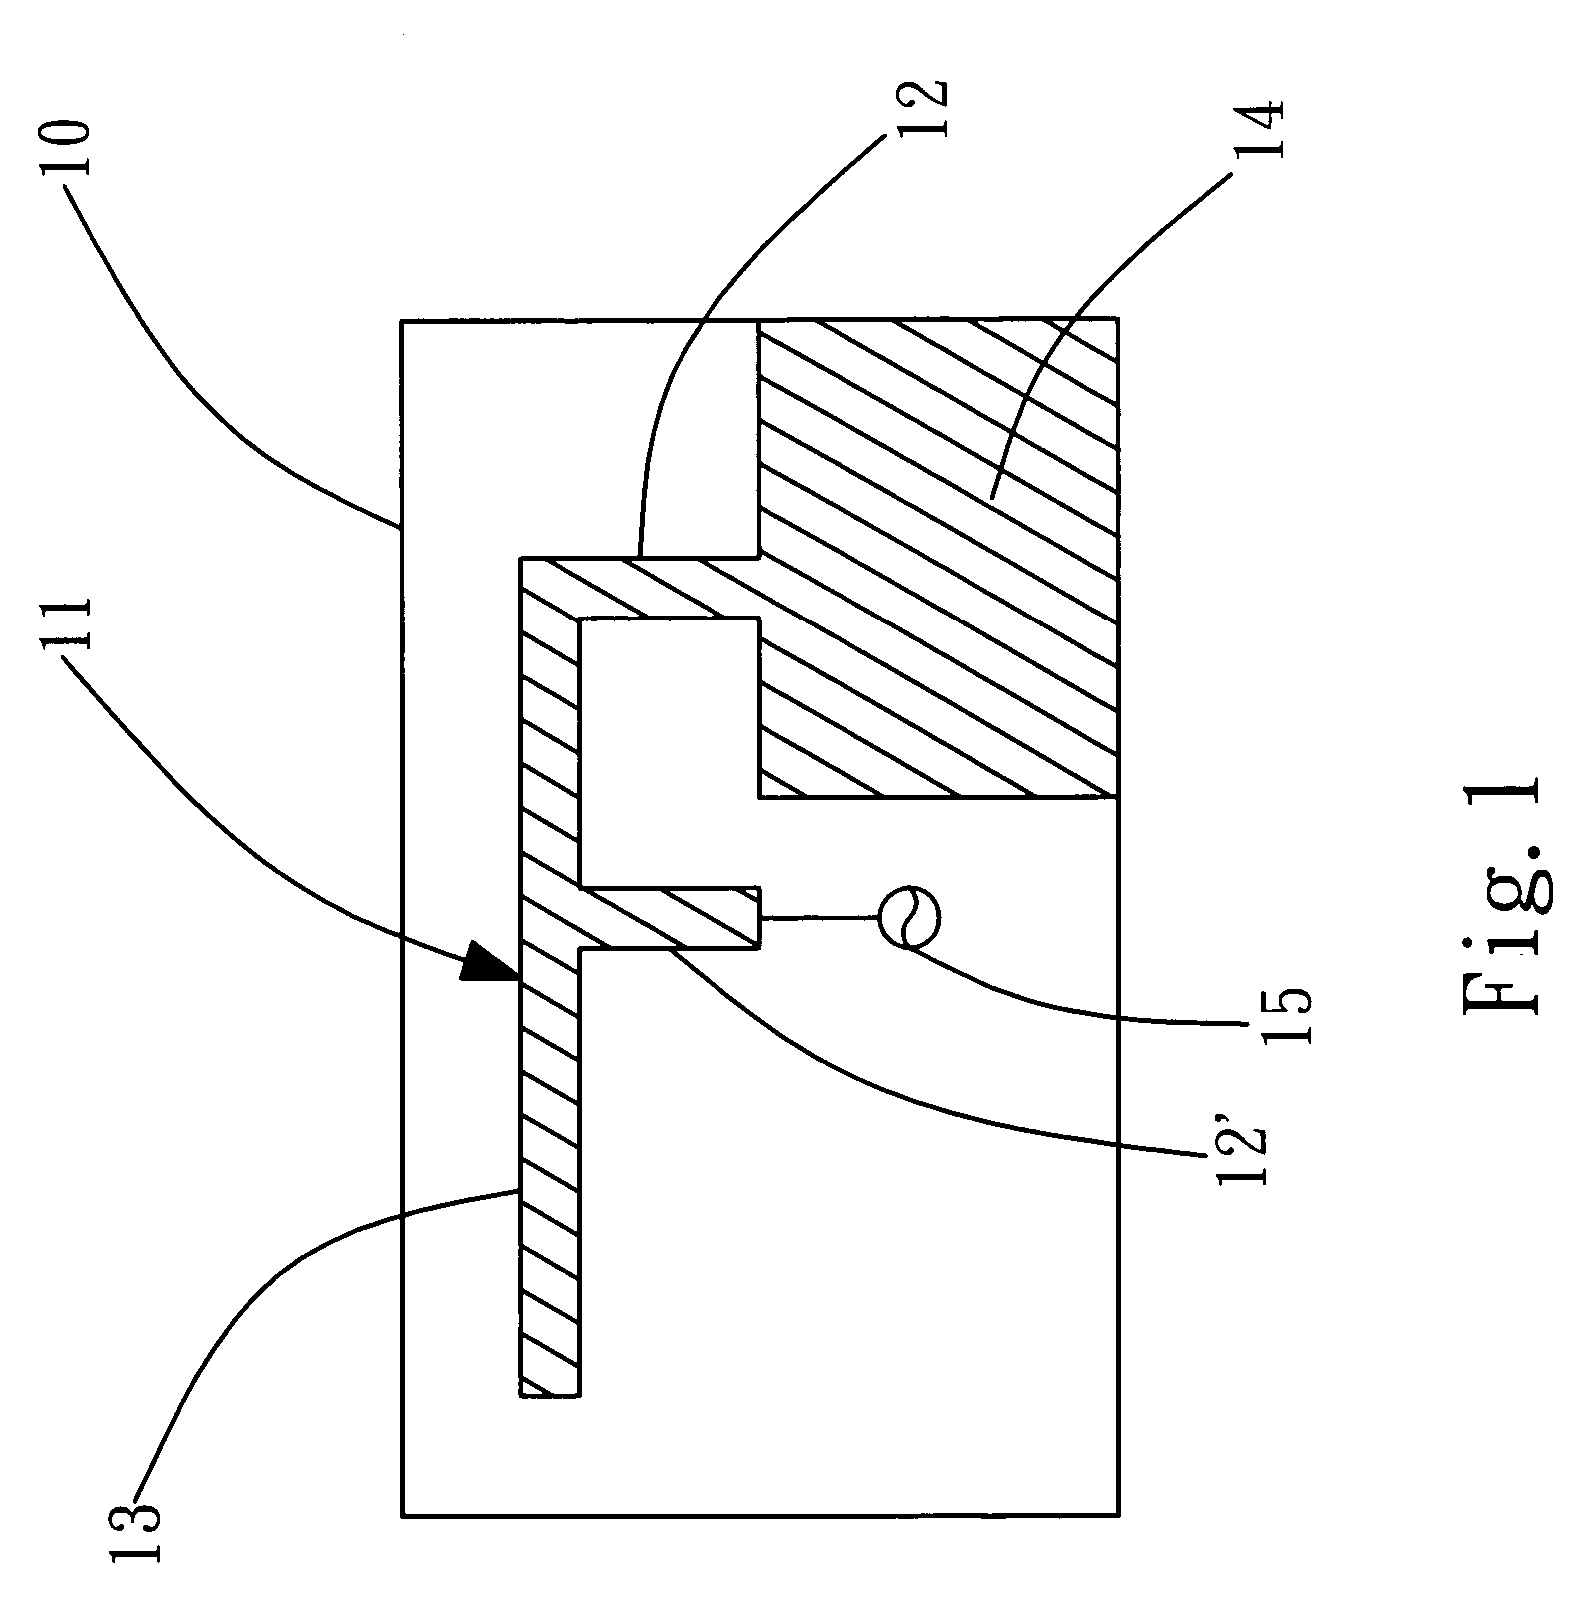 Structure for inverted F plane antenna